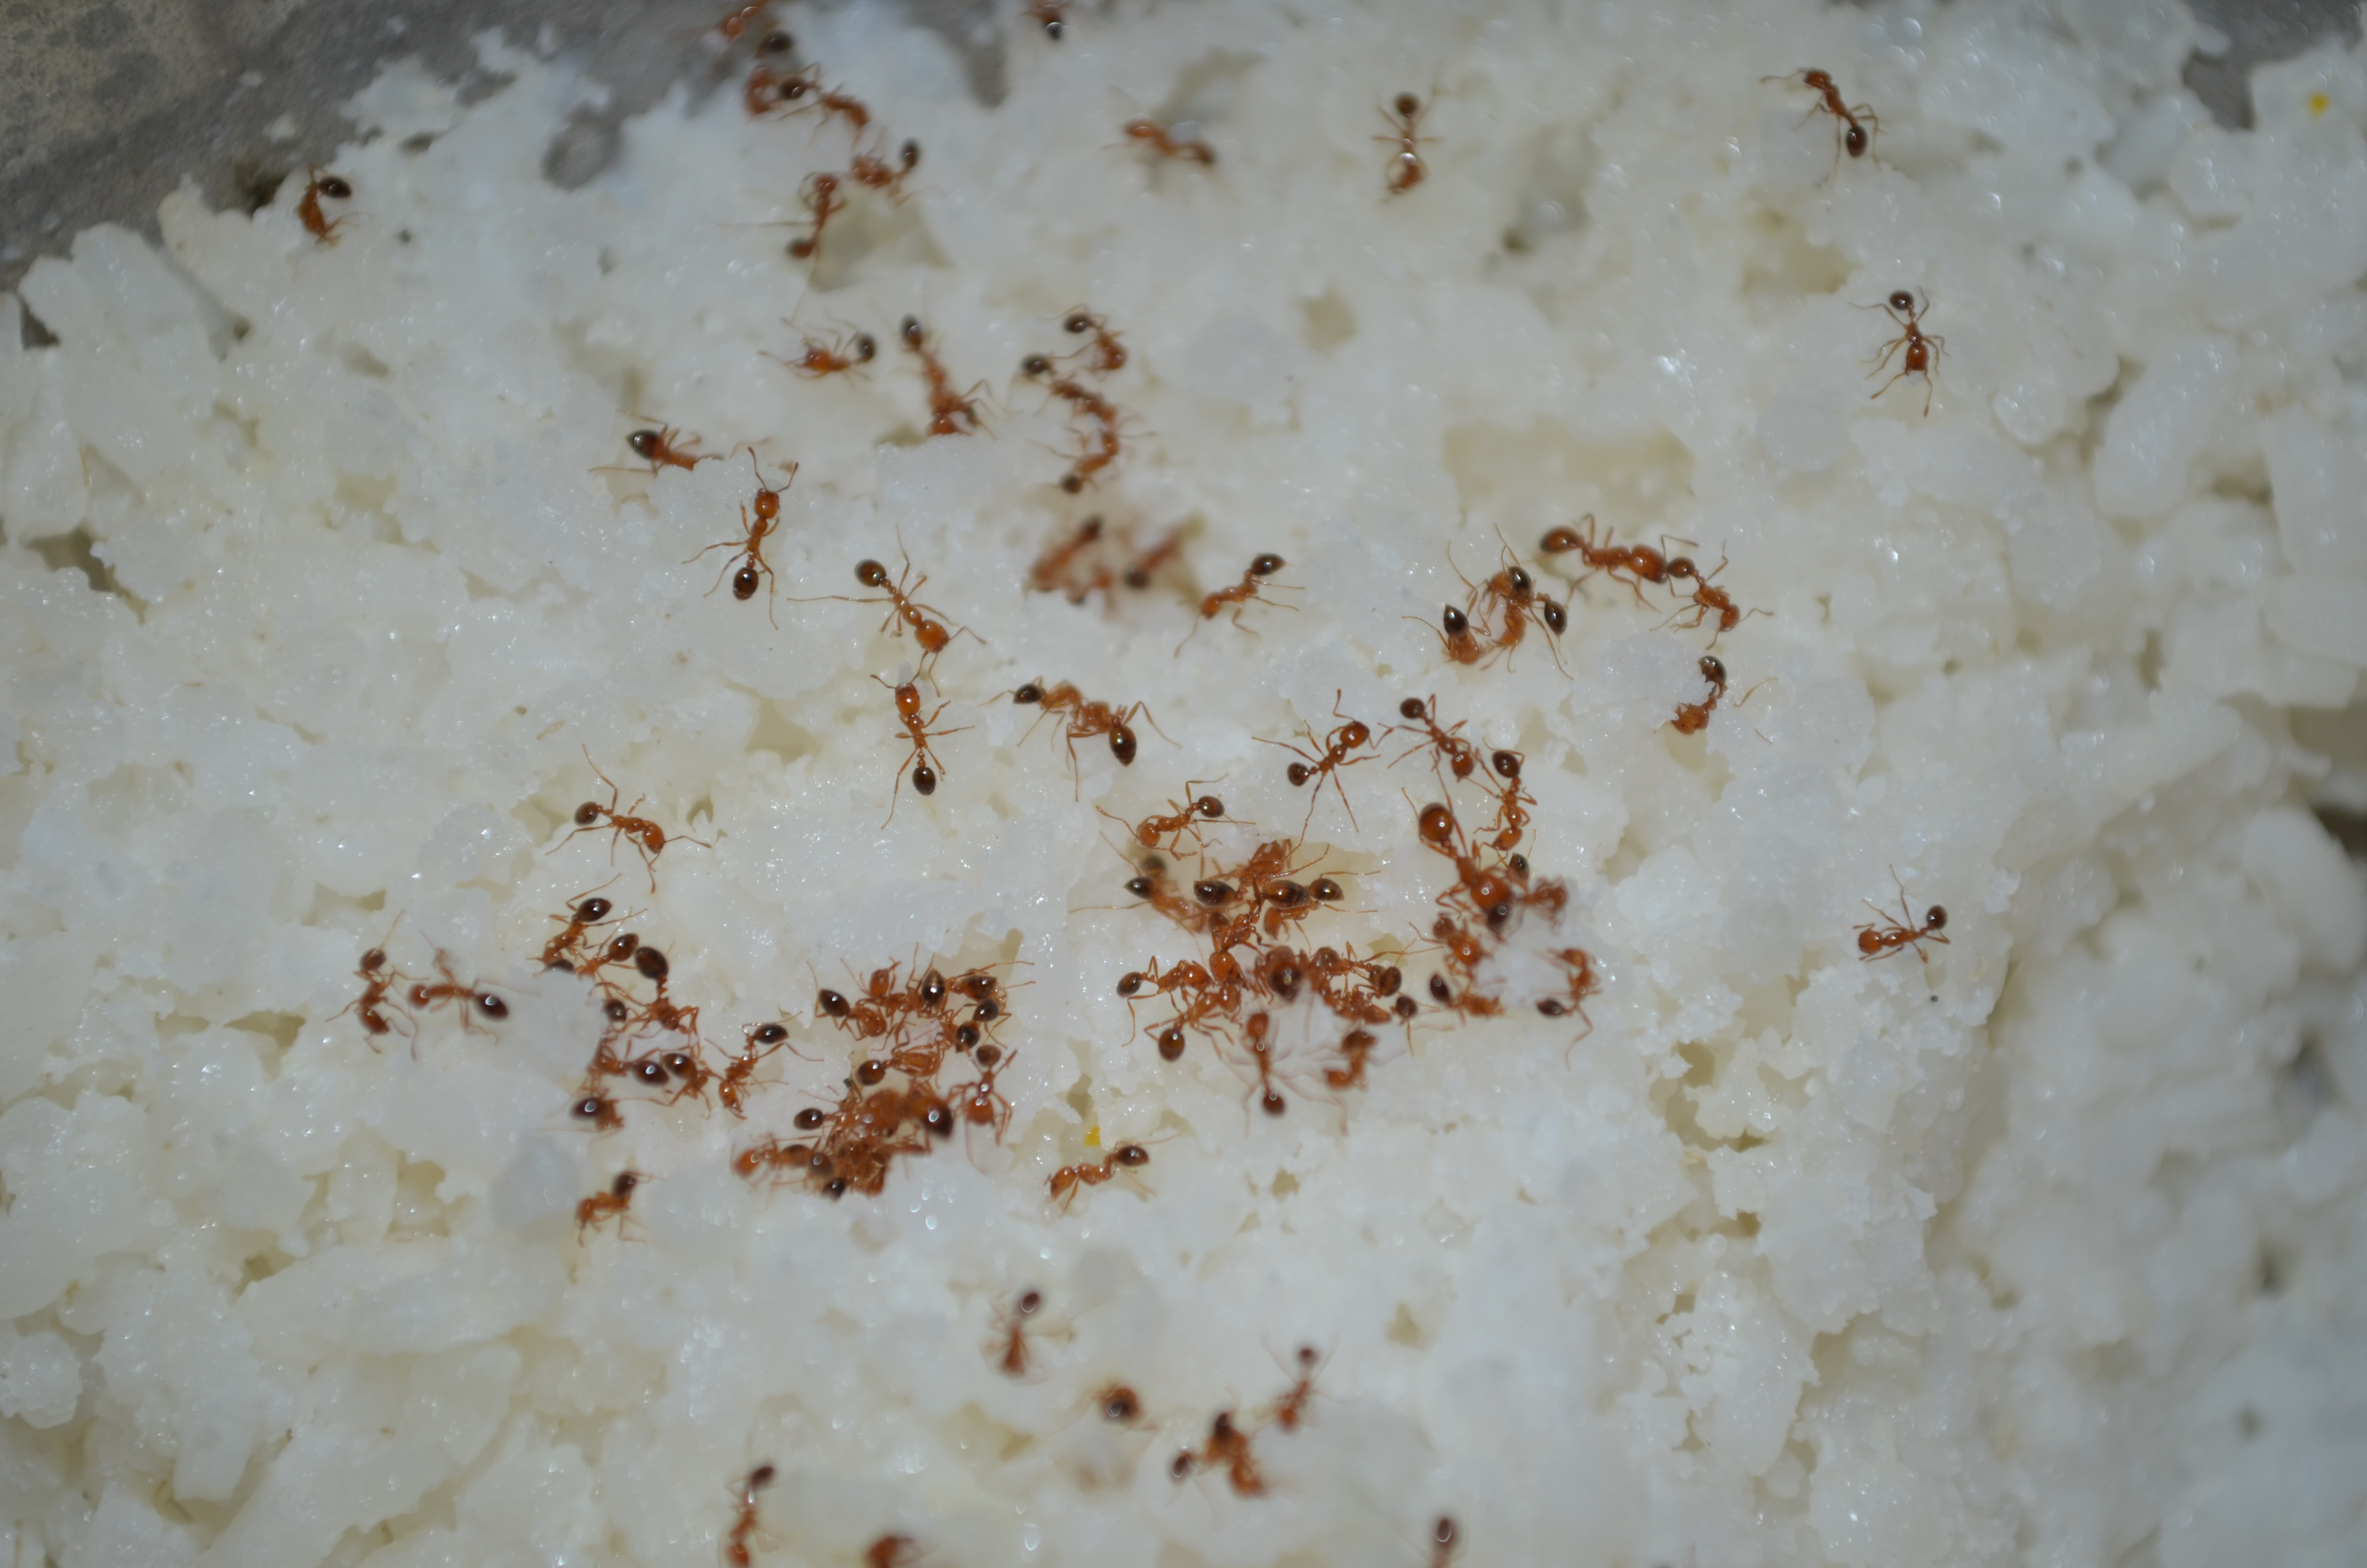 How do you Stop Ants from Eating Rice